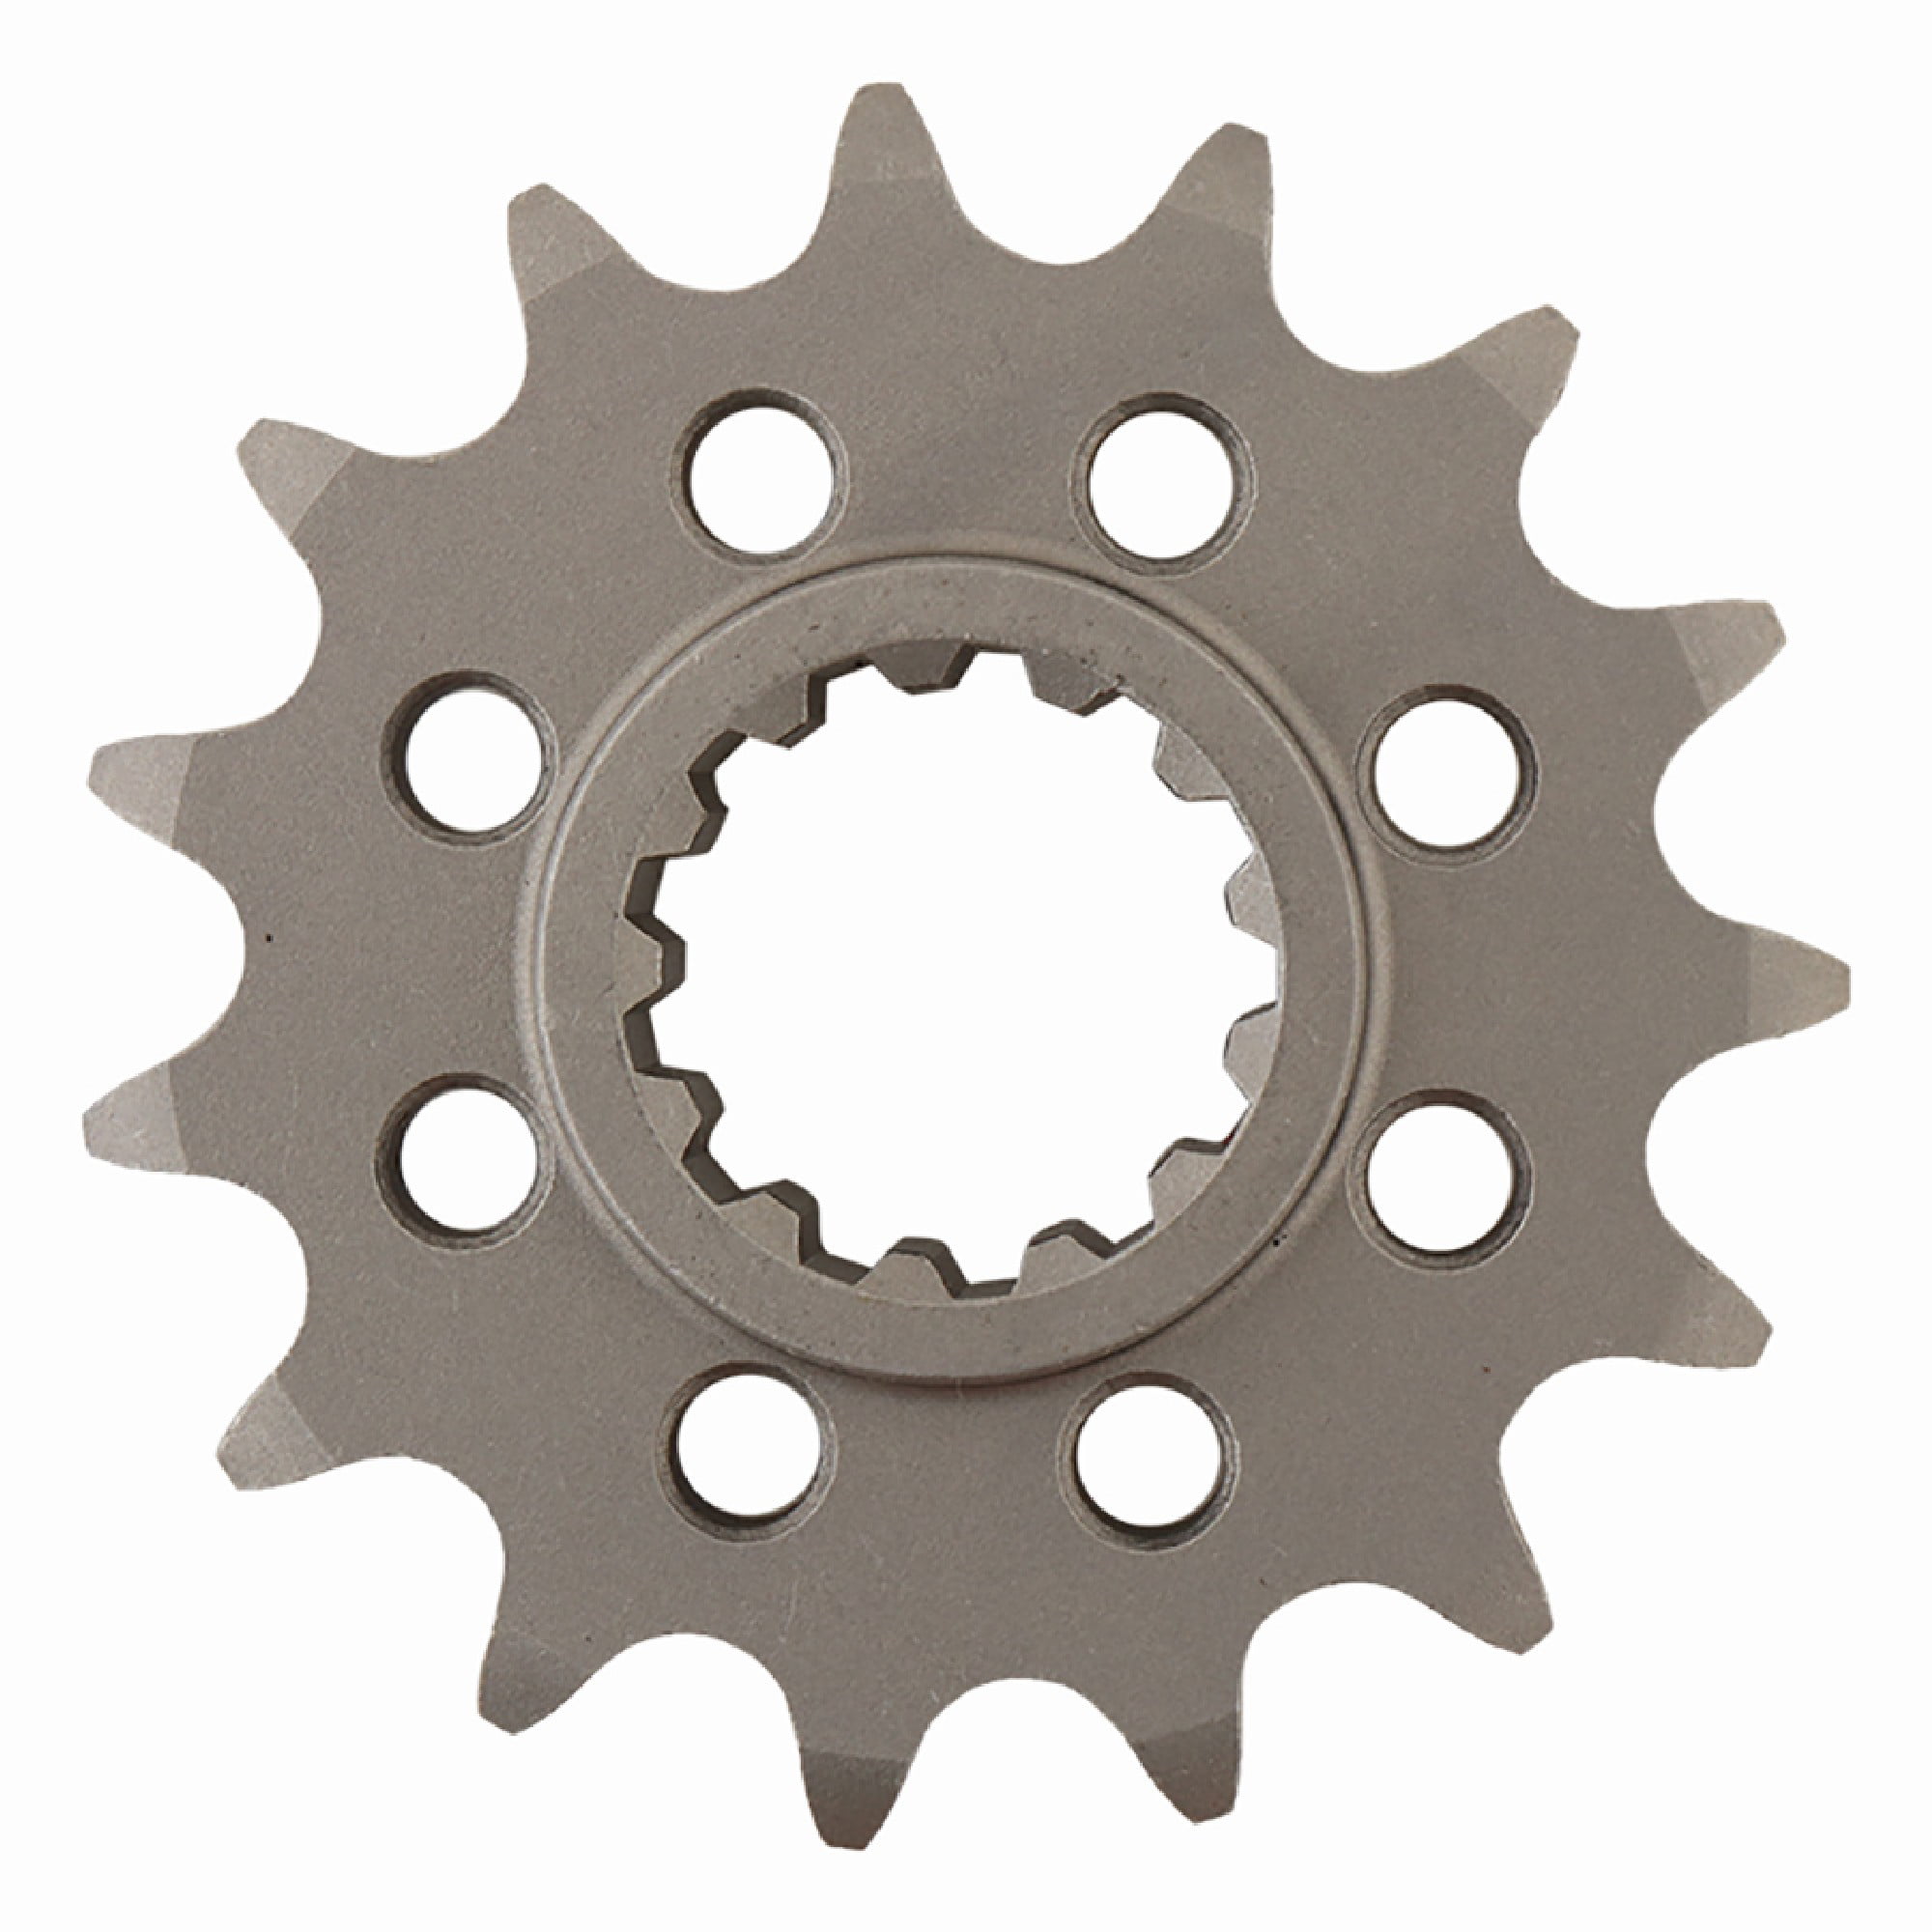 Honda CRF1000-L Africa Twin 2016 2017 Front Sprocket 15T 16T